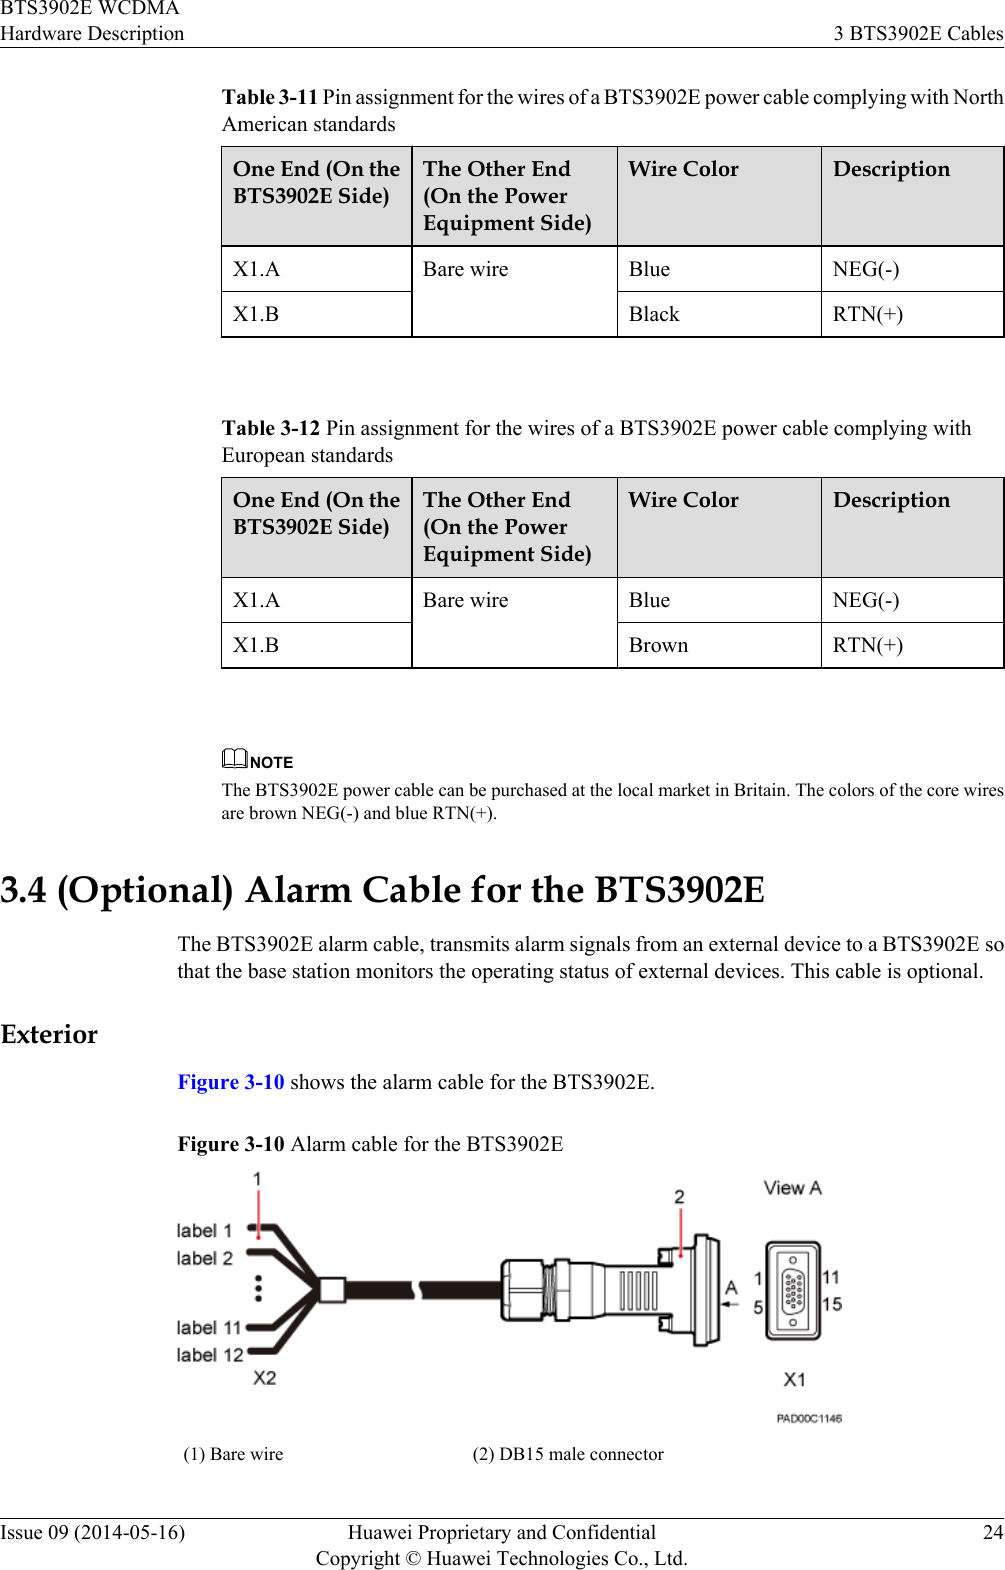 Table 3-11 Pin assignment for the wires of a BTS3902E power cable complying with NorthAmerican standardsOne End (On theBTS3902E Side)The Other End(On the PowerEquipment Side)Wire Color DescriptionX1.A Bare wire Blue NEG(-)X1.B Black RTN(+) Table 3-12 Pin assignment for the wires of a BTS3902E power cable complying withEuropean standardsOne End (On theBTS3902E Side)The Other End(On the PowerEquipment Side)Wire Color DescriptionX1.A Bare wire Blue NEG(-)X1.B Brown RTN(+) NOTEThe BTS3902E power cable can be purchased at the local market in Britain. The colors of the core wiresare brown NEG(-) and blue RTN(+).3.4 (Optional) Alarm Cable for the BTS3902EThe BTS3902E alarm cable, transmits alarm signals from an external device to a BTS3902E sothat the base station monitors the operating status of external devices. This cable is optional.ExteriorFigure 3-10 shows the alarm cable for the BTS3902E.Figure 3-10 Alarm cable for the BTS3902E(1) Bare wire (2) DB15 male connectorBTS3902E WCDMAHardware Description 3 BTS3902E CablesIssue 09 (2014-05-16) Huawei Proprietary and ConfidentialCopyright © Huawei Technologies Co., Ltd.24